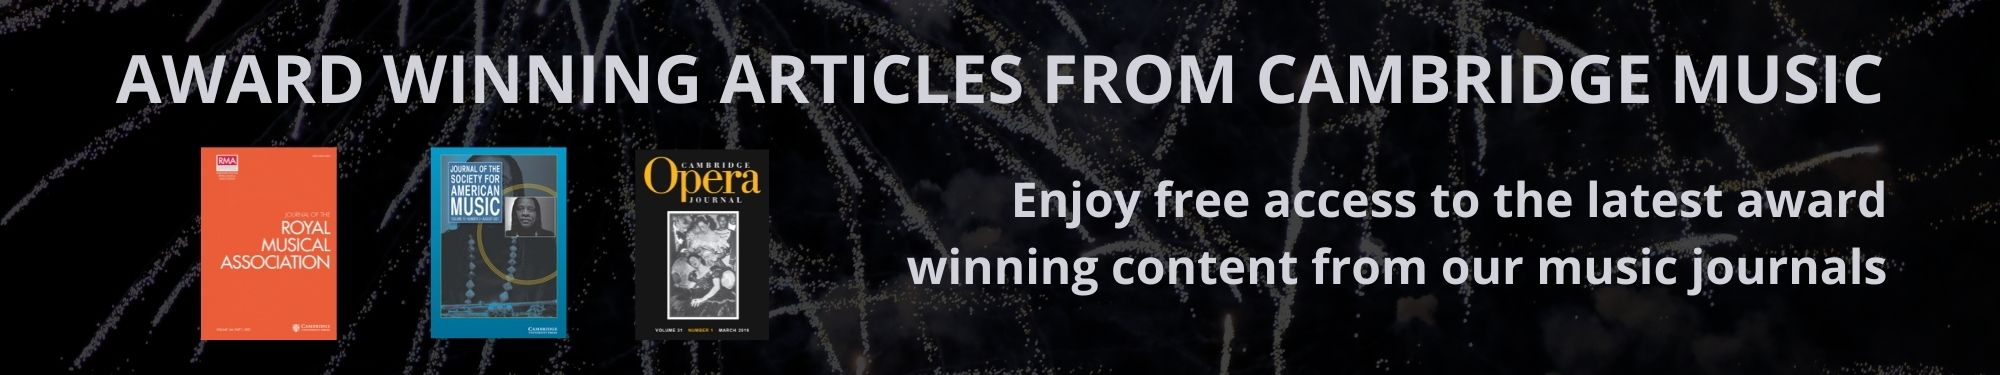 Enjoy free access to the latest award winning articles from Cambridge Music journals